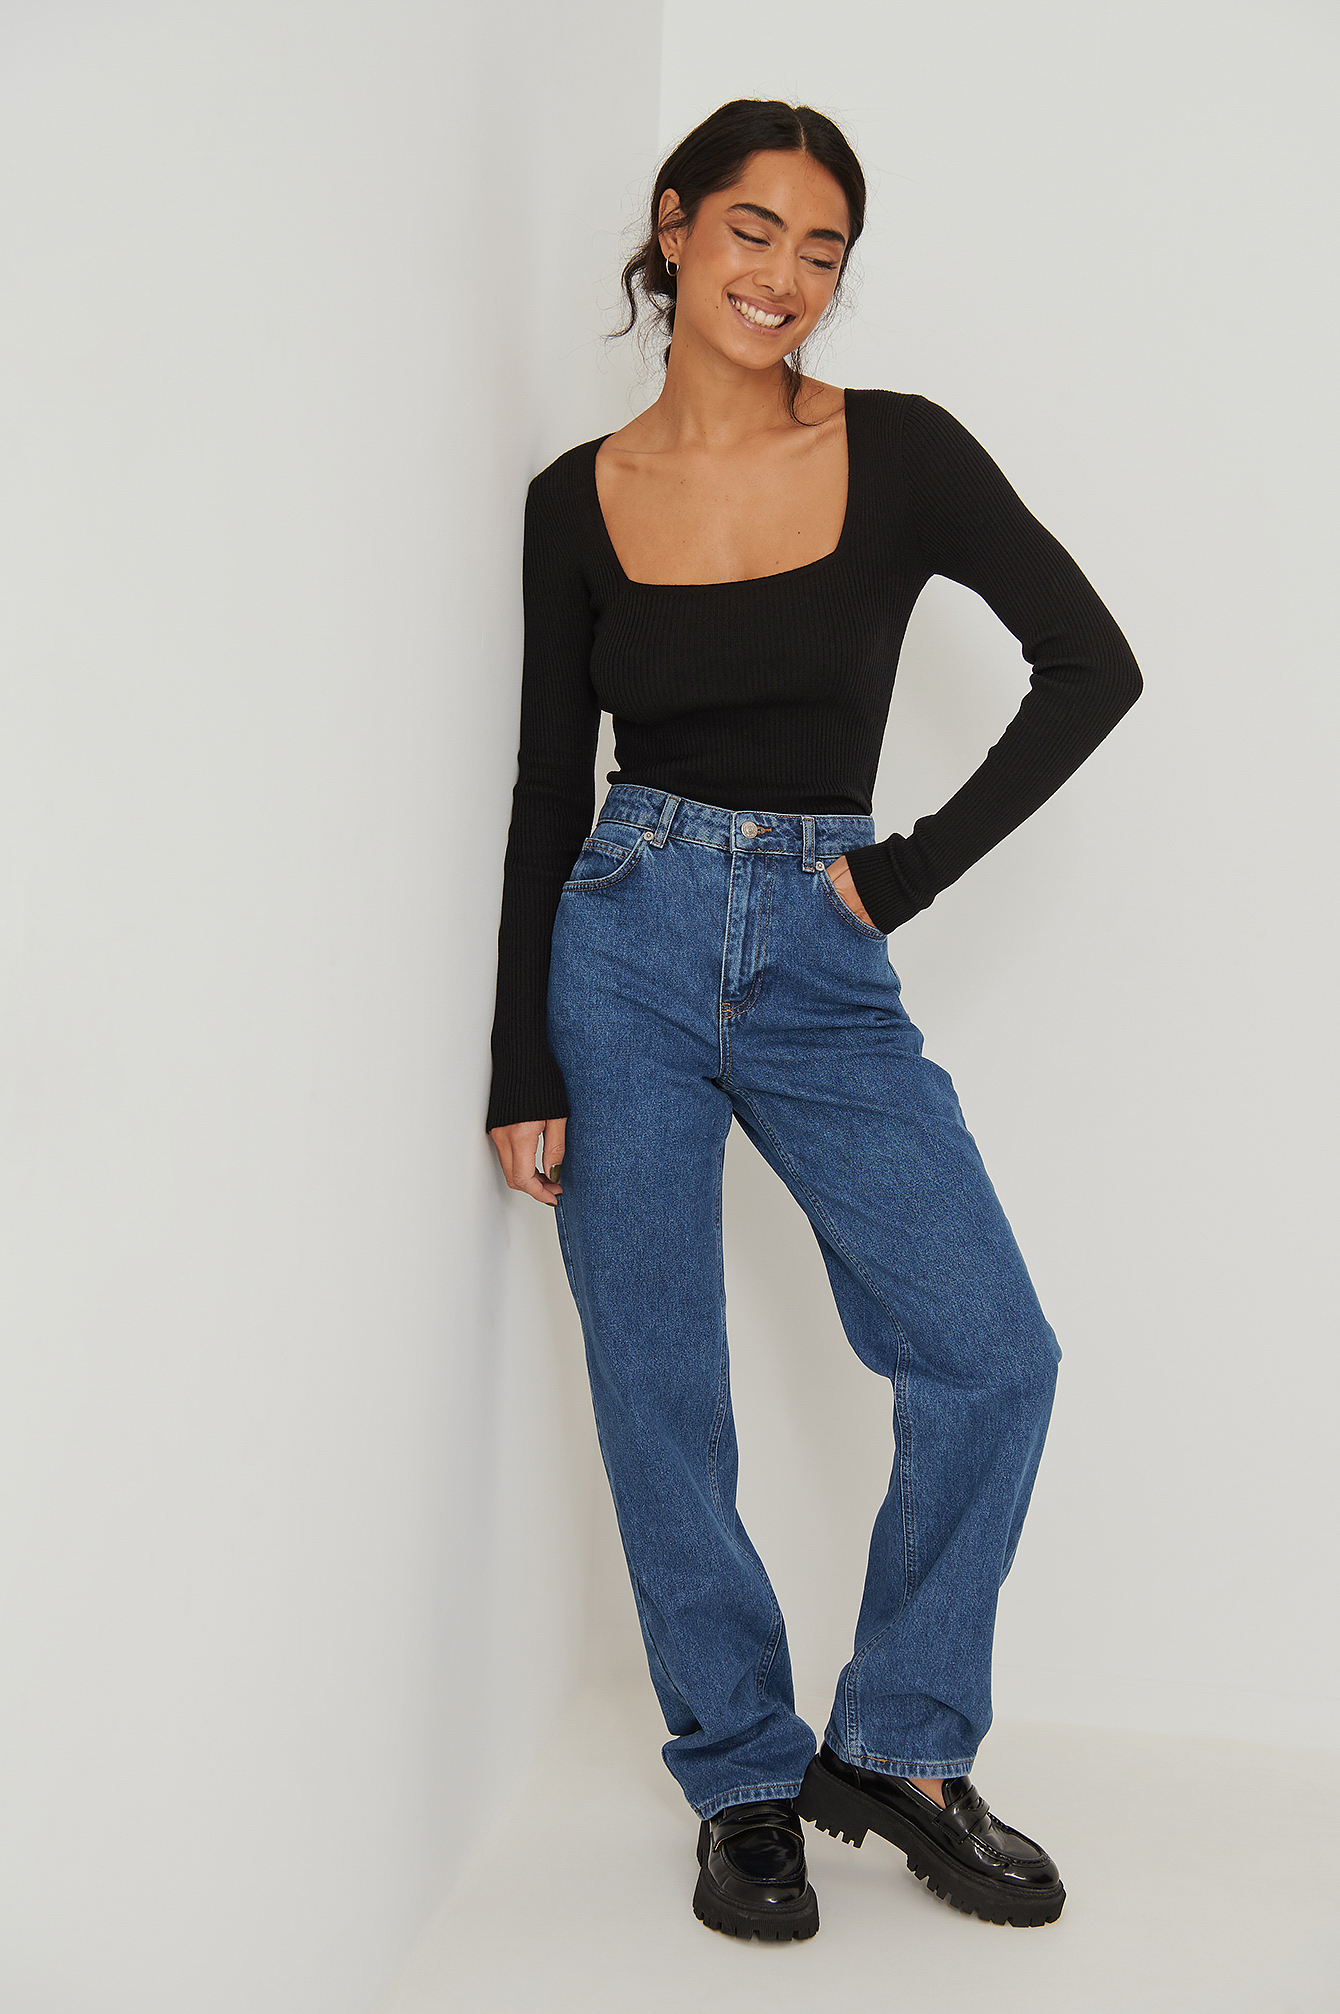 Ribbed Square Neck Top Outfit